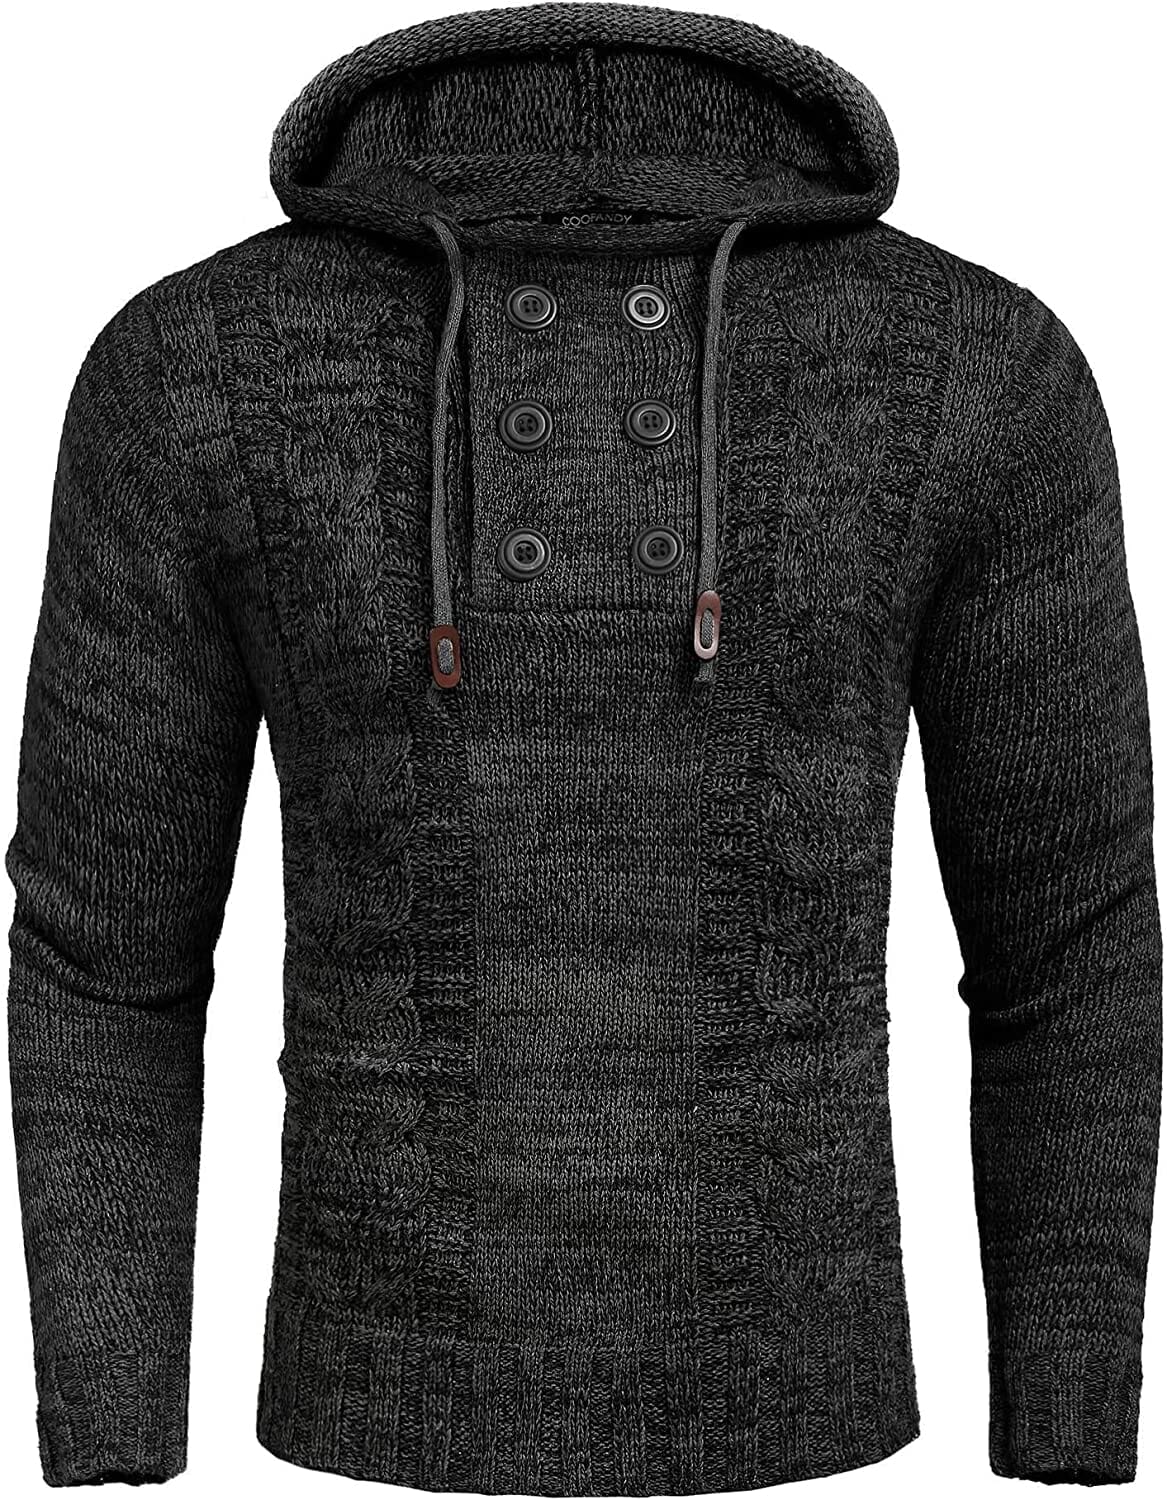 Casual Pullover Knitted Hoodies (US Only) Hoodies COOFANDY Store Black S 